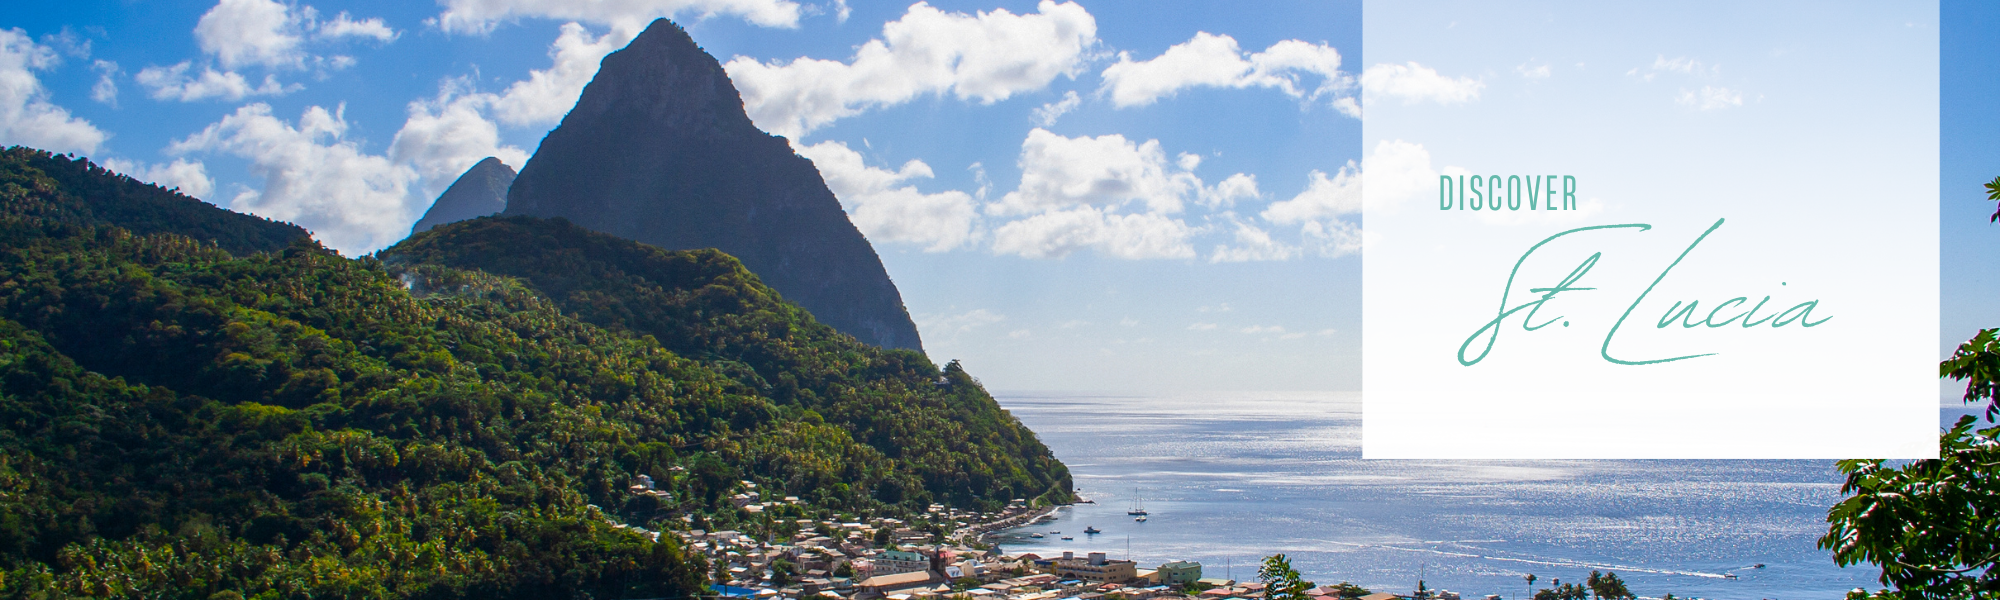 discover St. Lucia